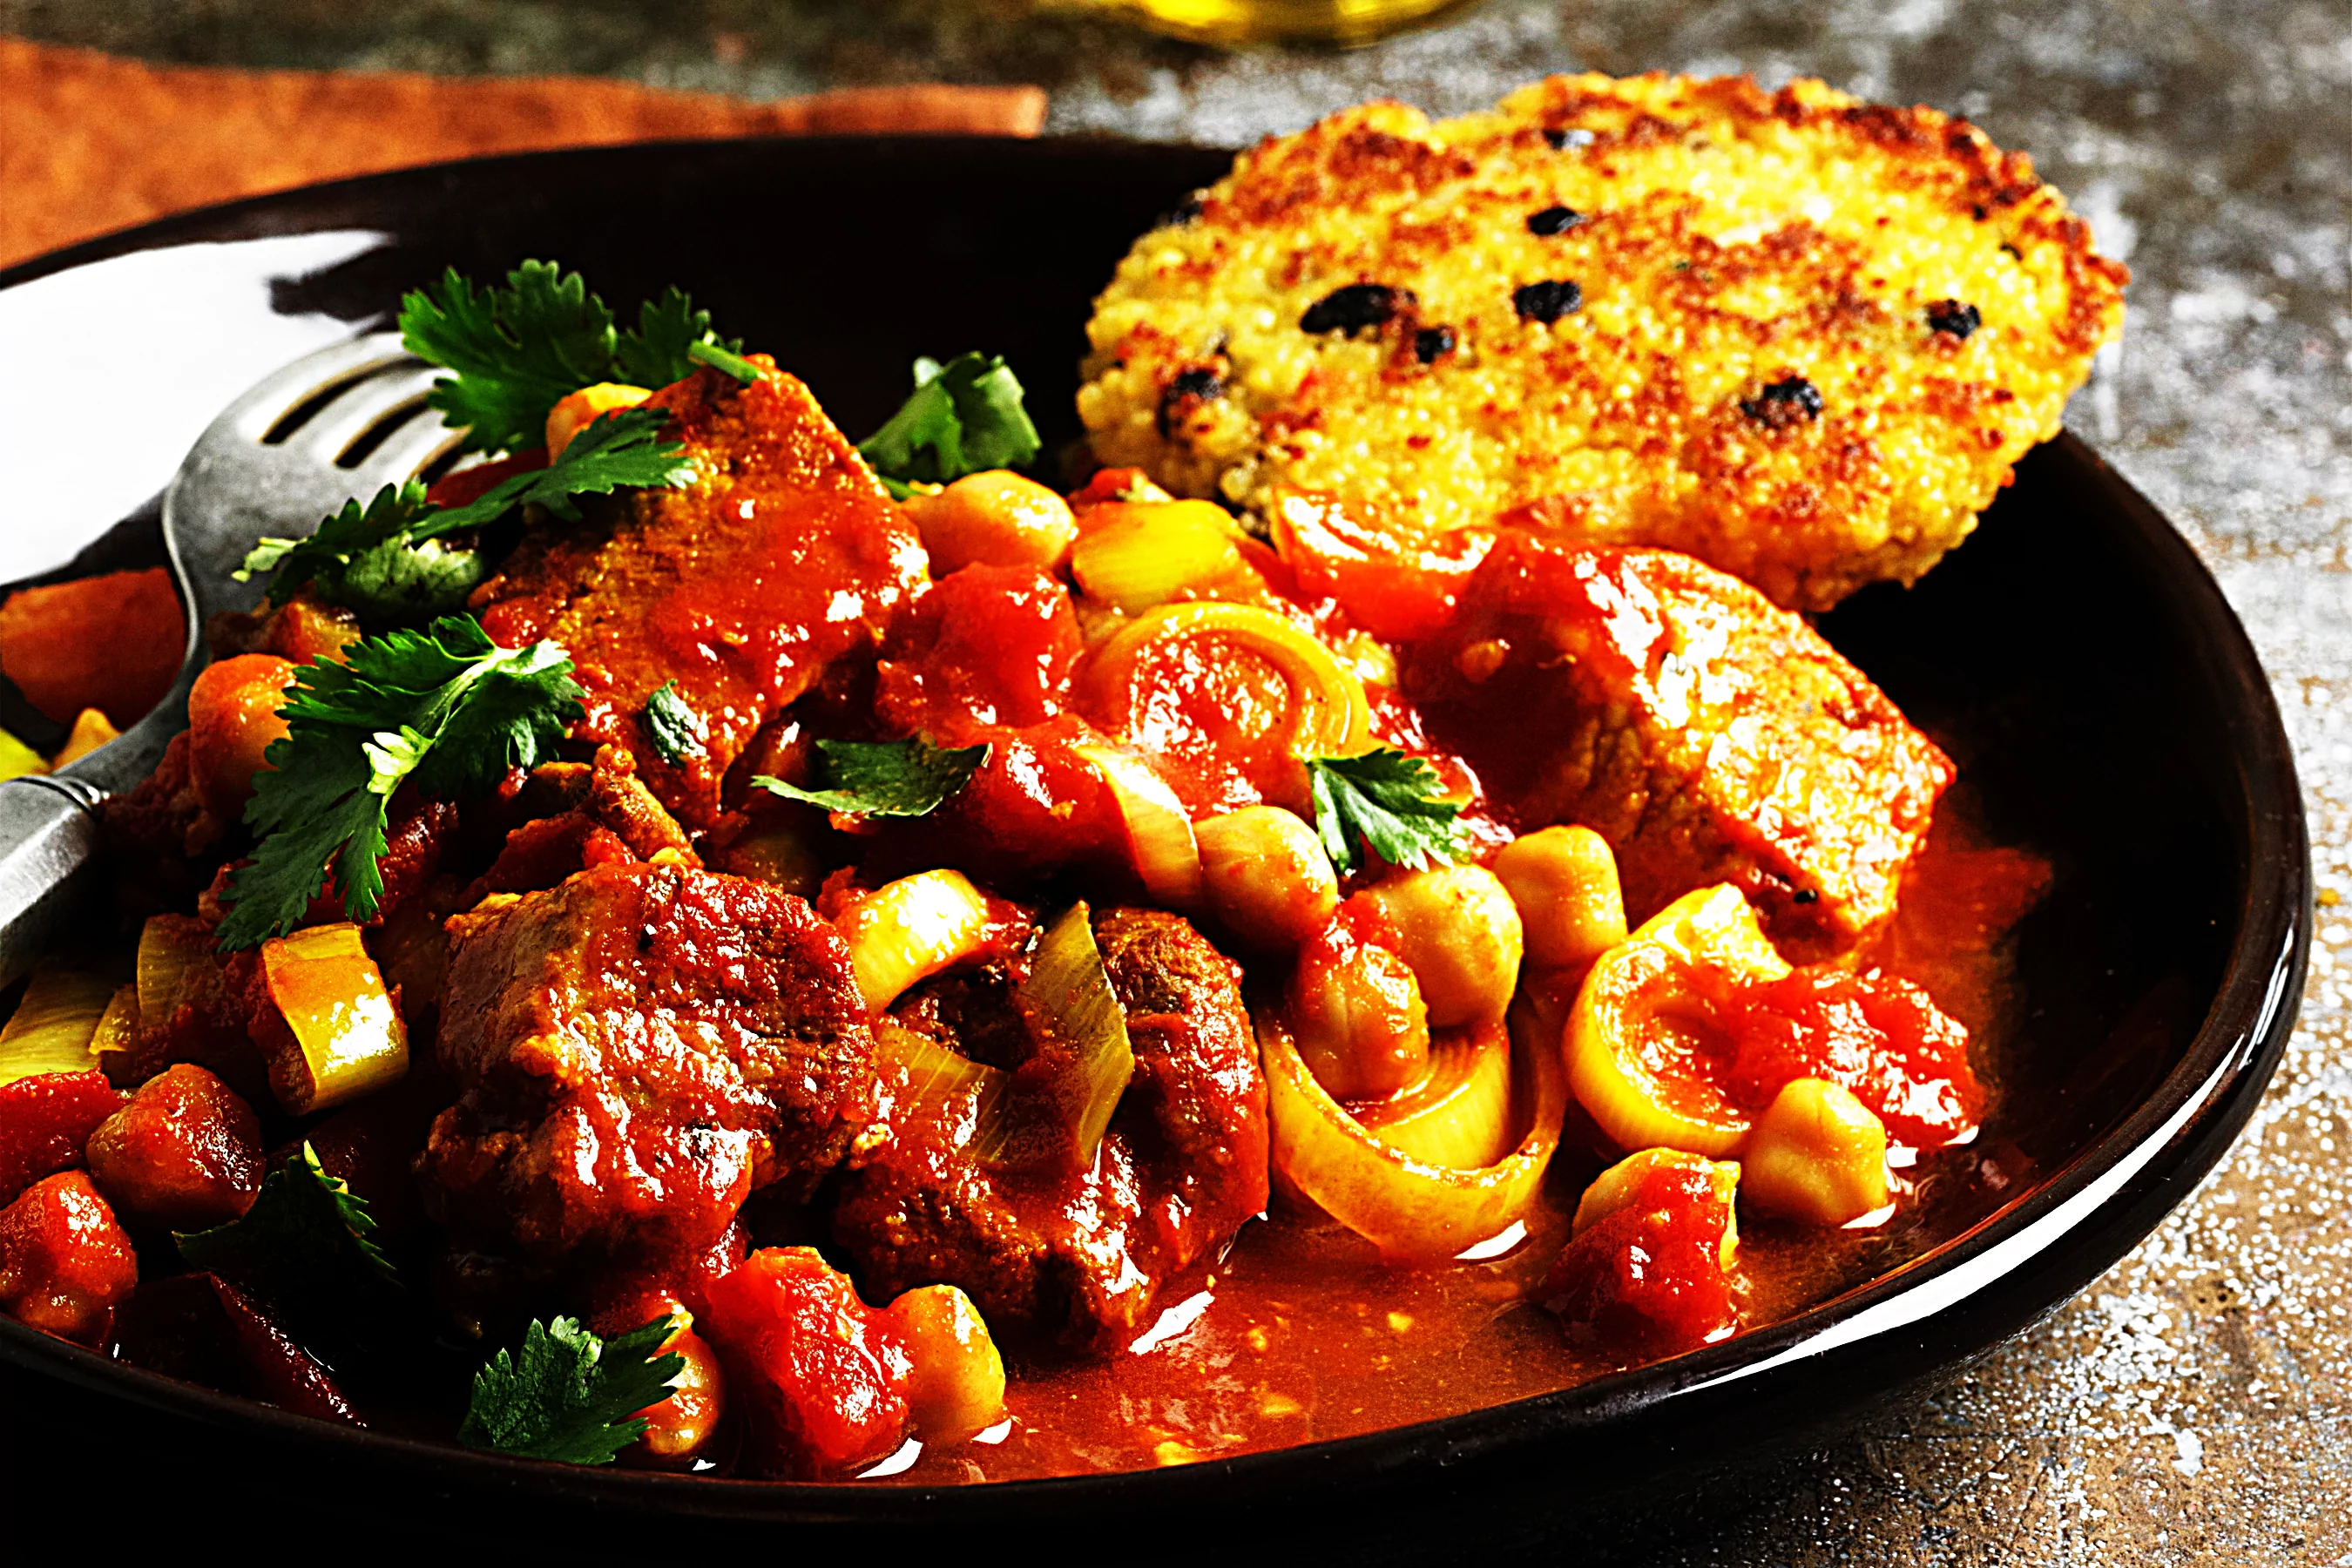 Stupid-Easy Recipe for Moroccan-Inspired Country-Style Rib Ragu with Couscous Cakes (#1 Top-Rated)